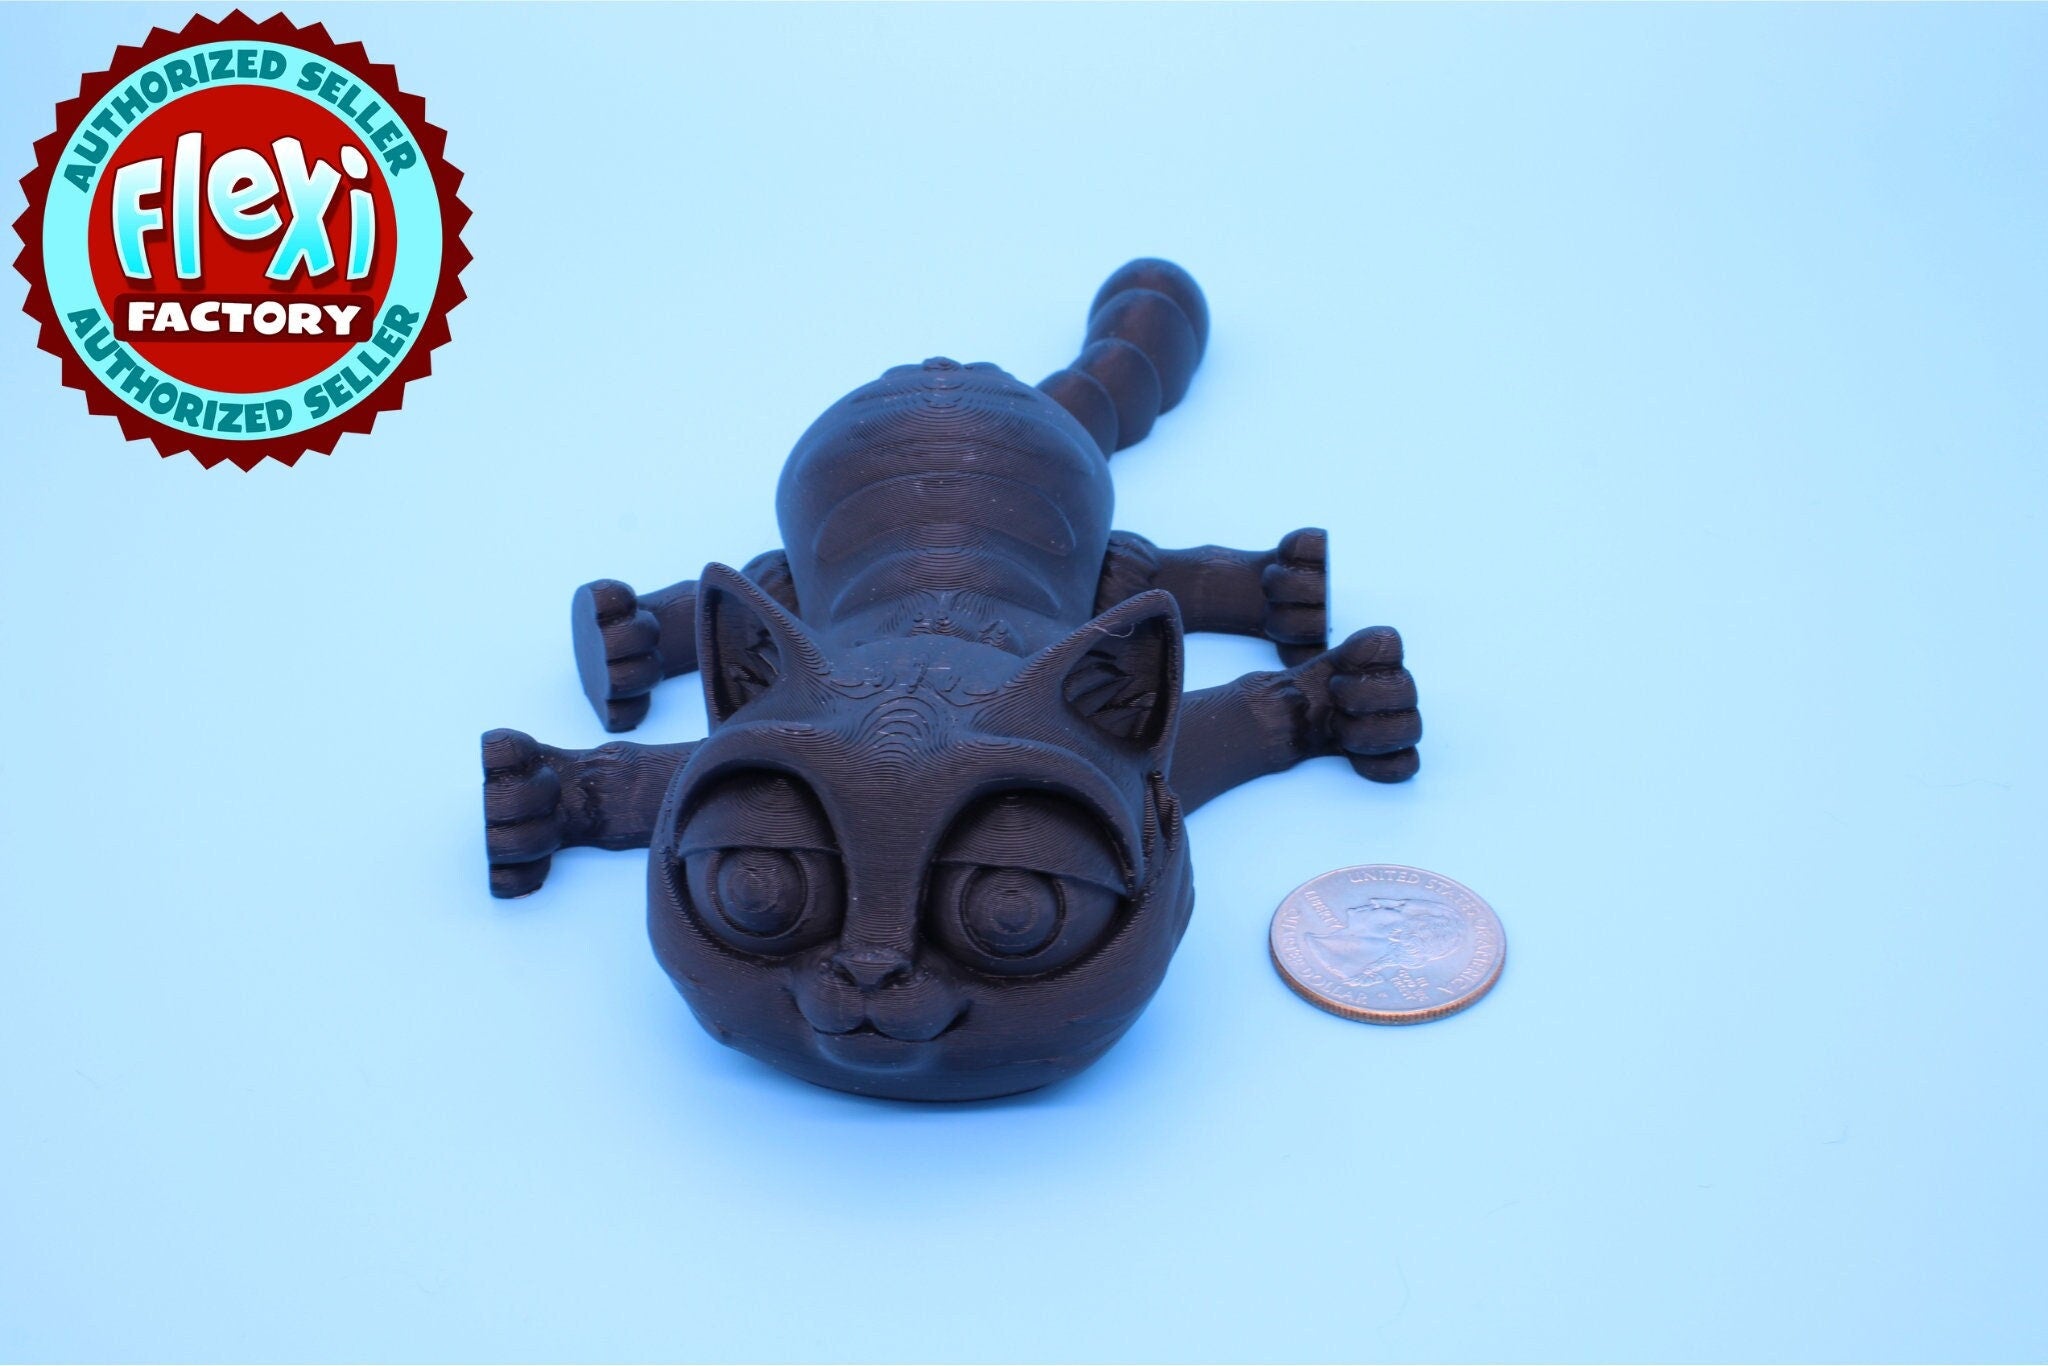 7 inch Fidget Cat | Black Cat | Multi Color | Fidget Toy | 3D Printed Kitten | Articulating Kitty | Flexi Toy | Stress Relief Gift